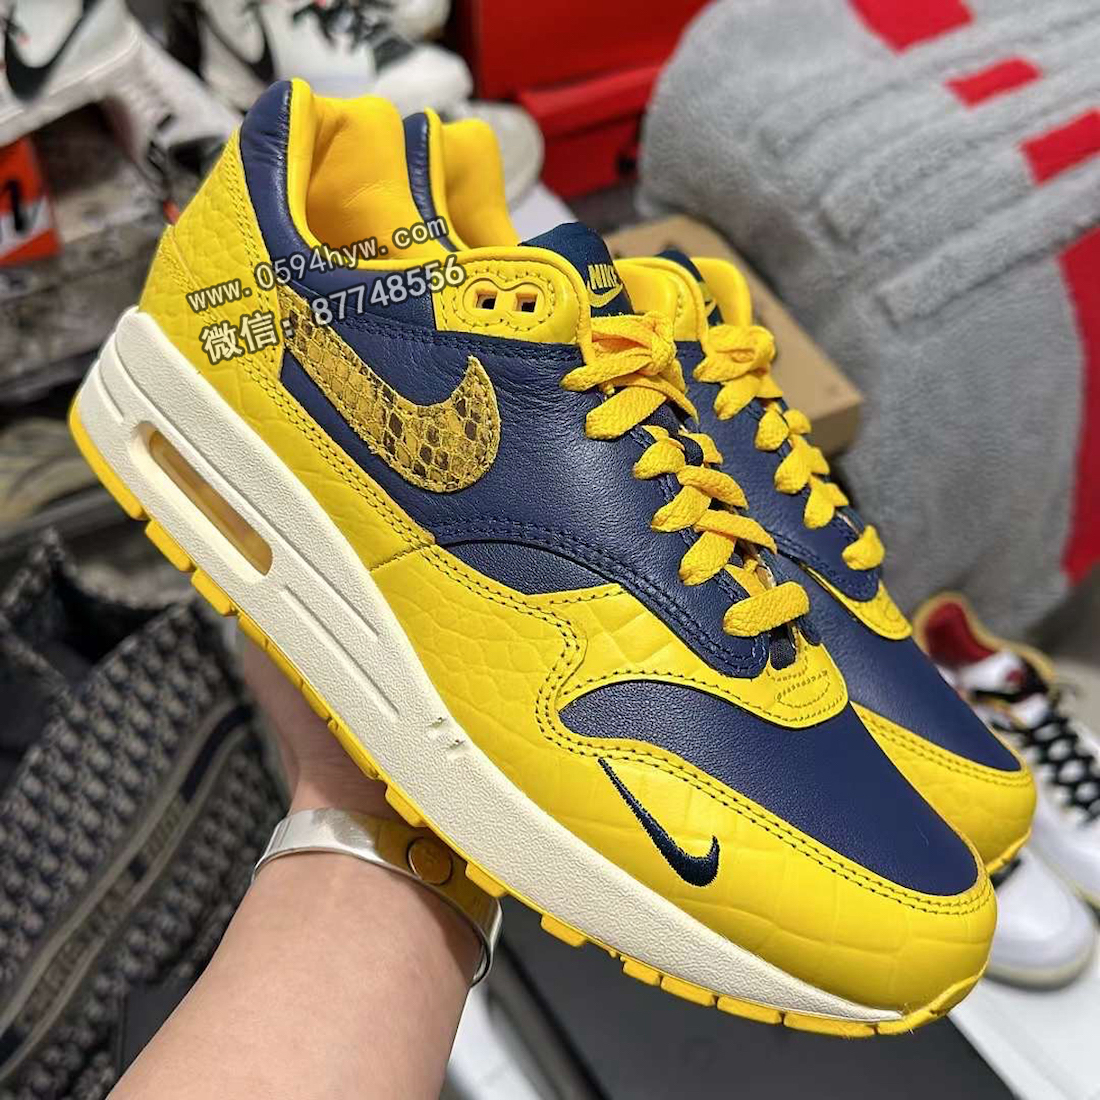 Nike-Air-Max-1-Midnight-Navy-Varsity-Maize-FJ5479-410-Release-Date